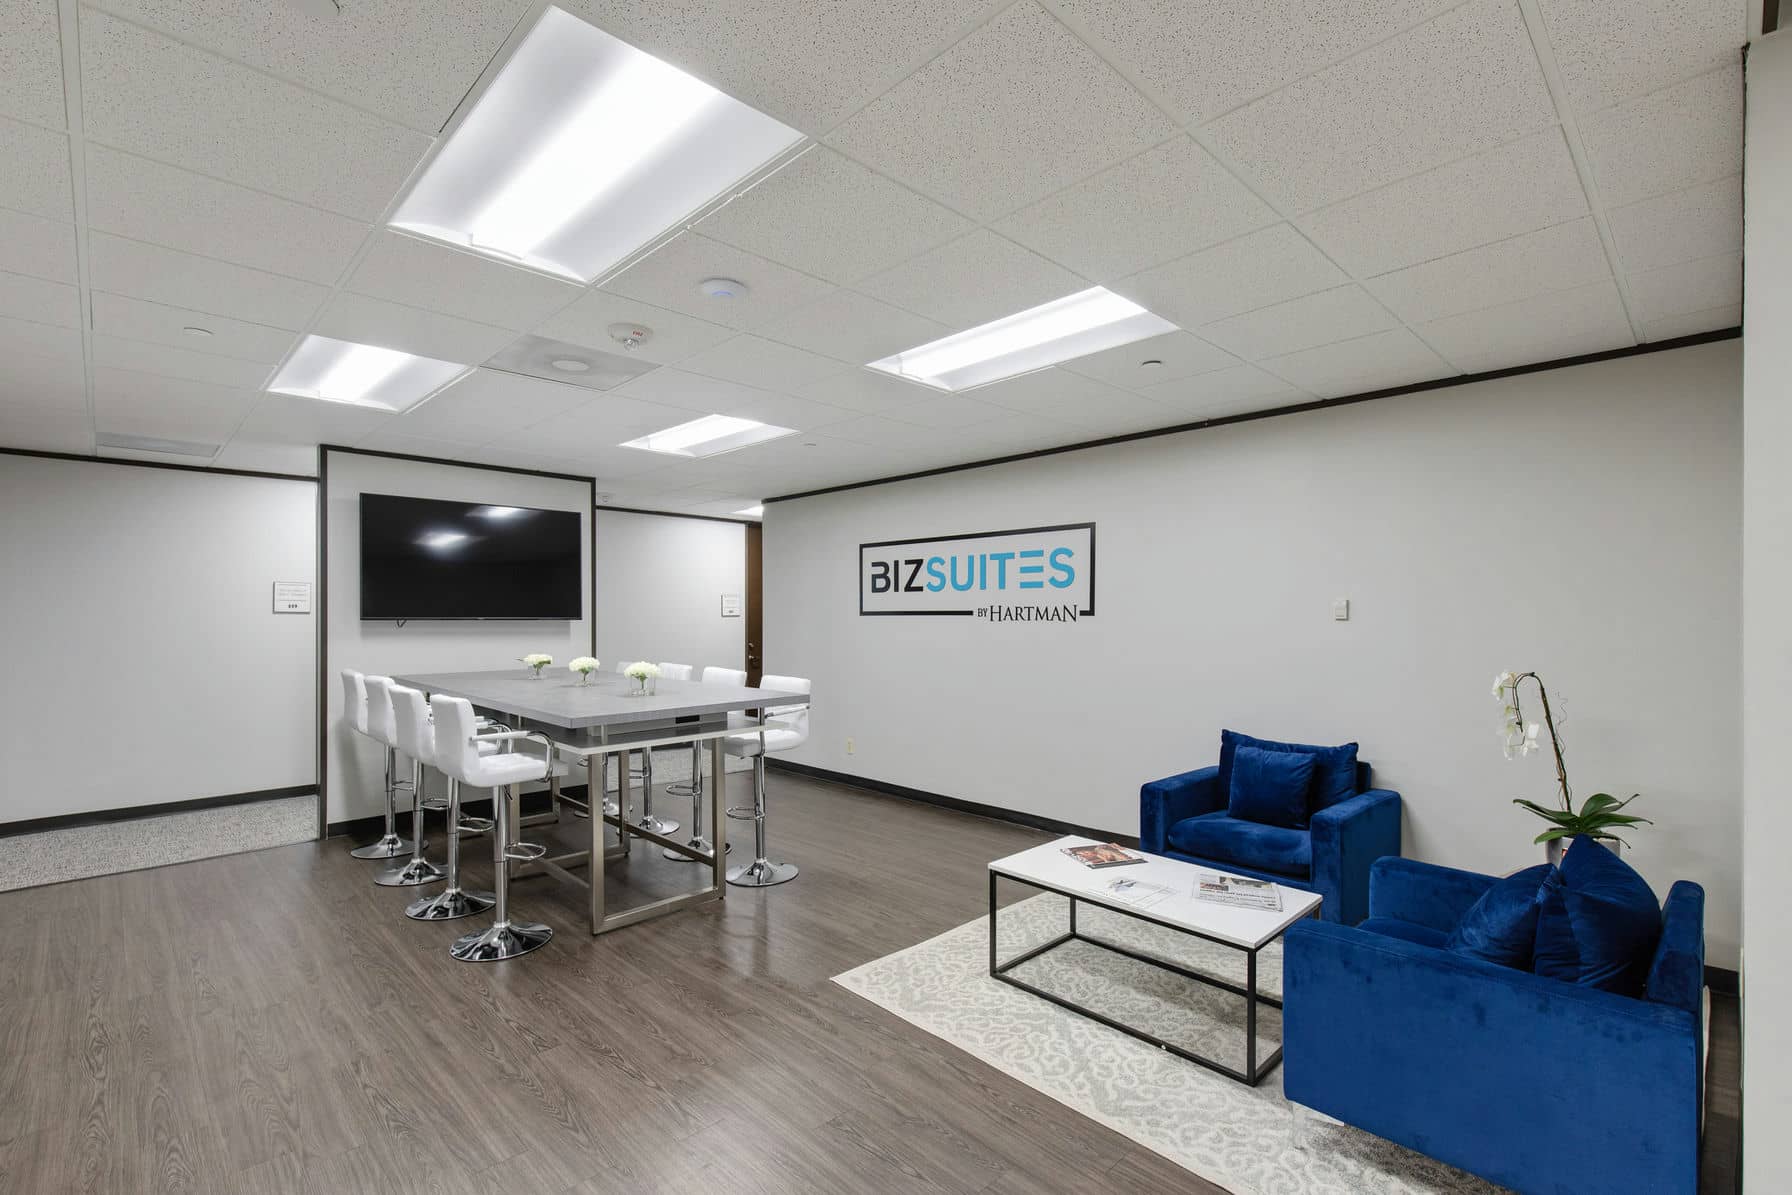 BIZSUITES by Hartman offers executive suites for business startups